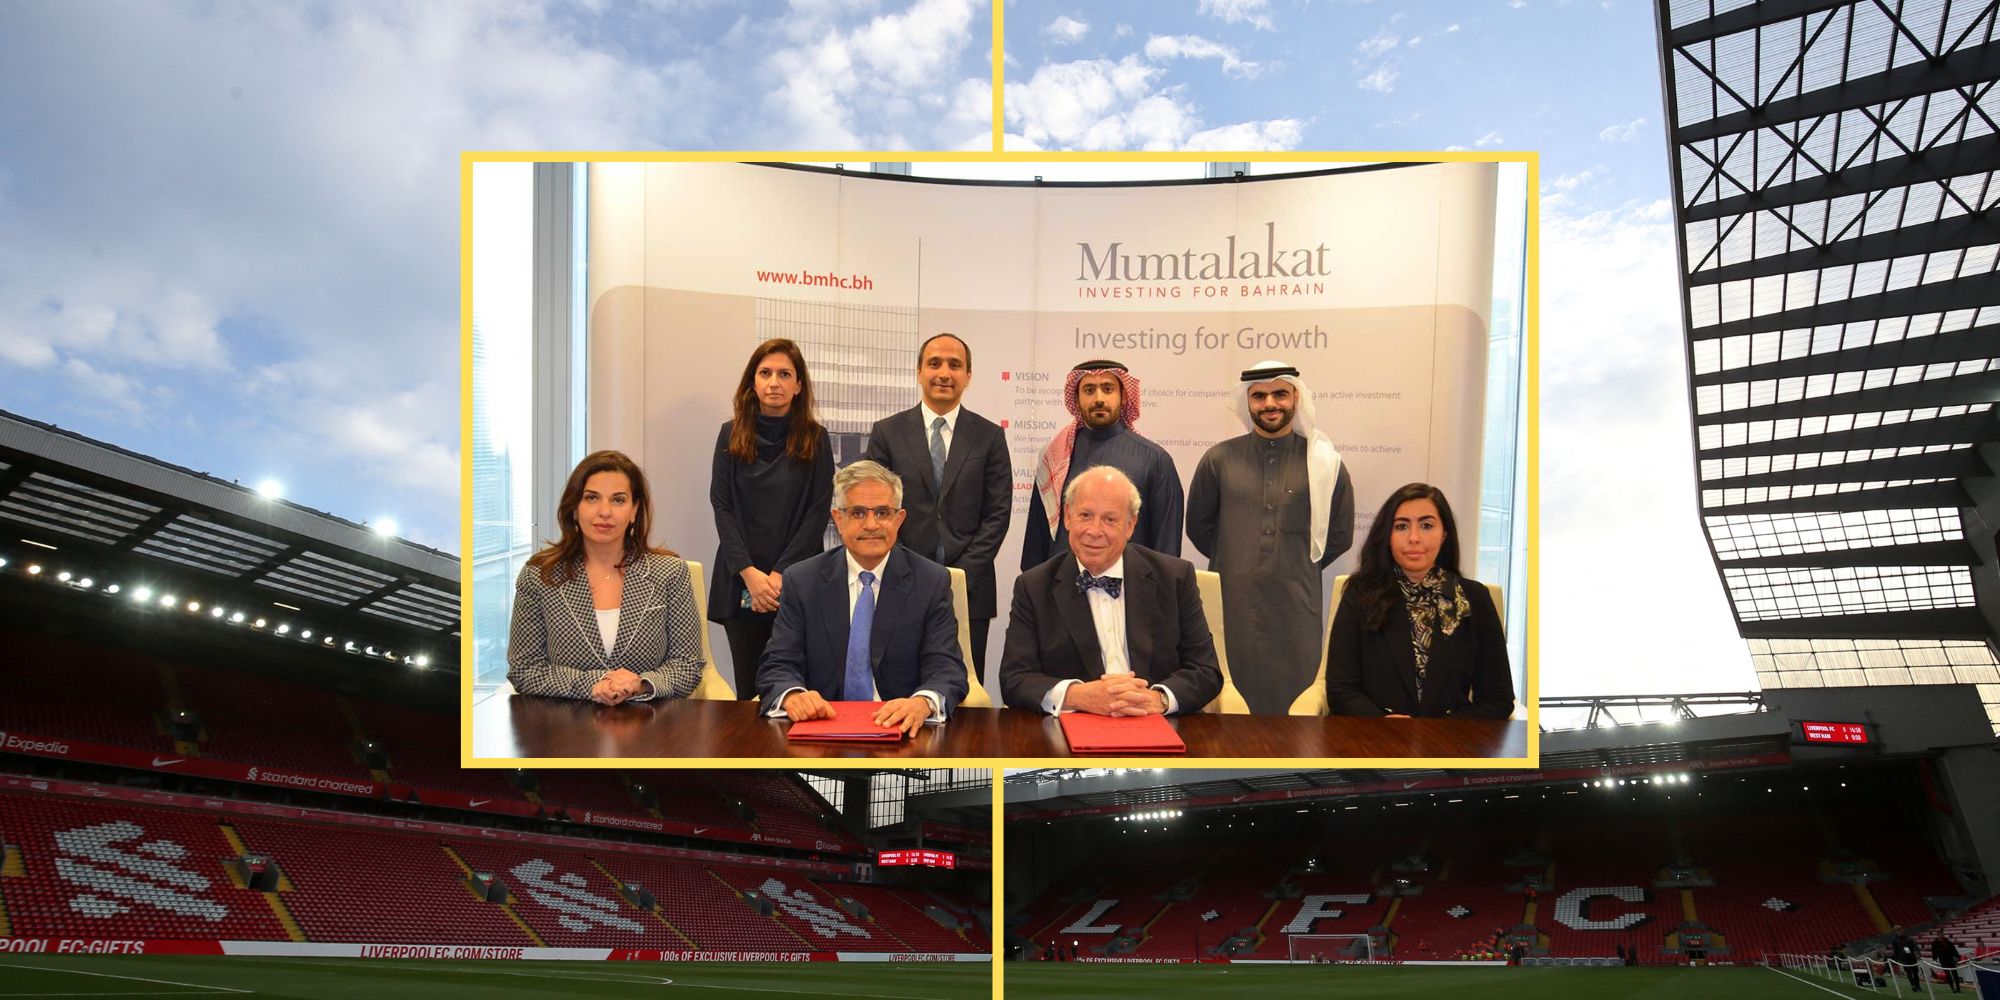 CBS journalist shares Bahrain’s sovereign wealth fund’s stance on buying Liverpool